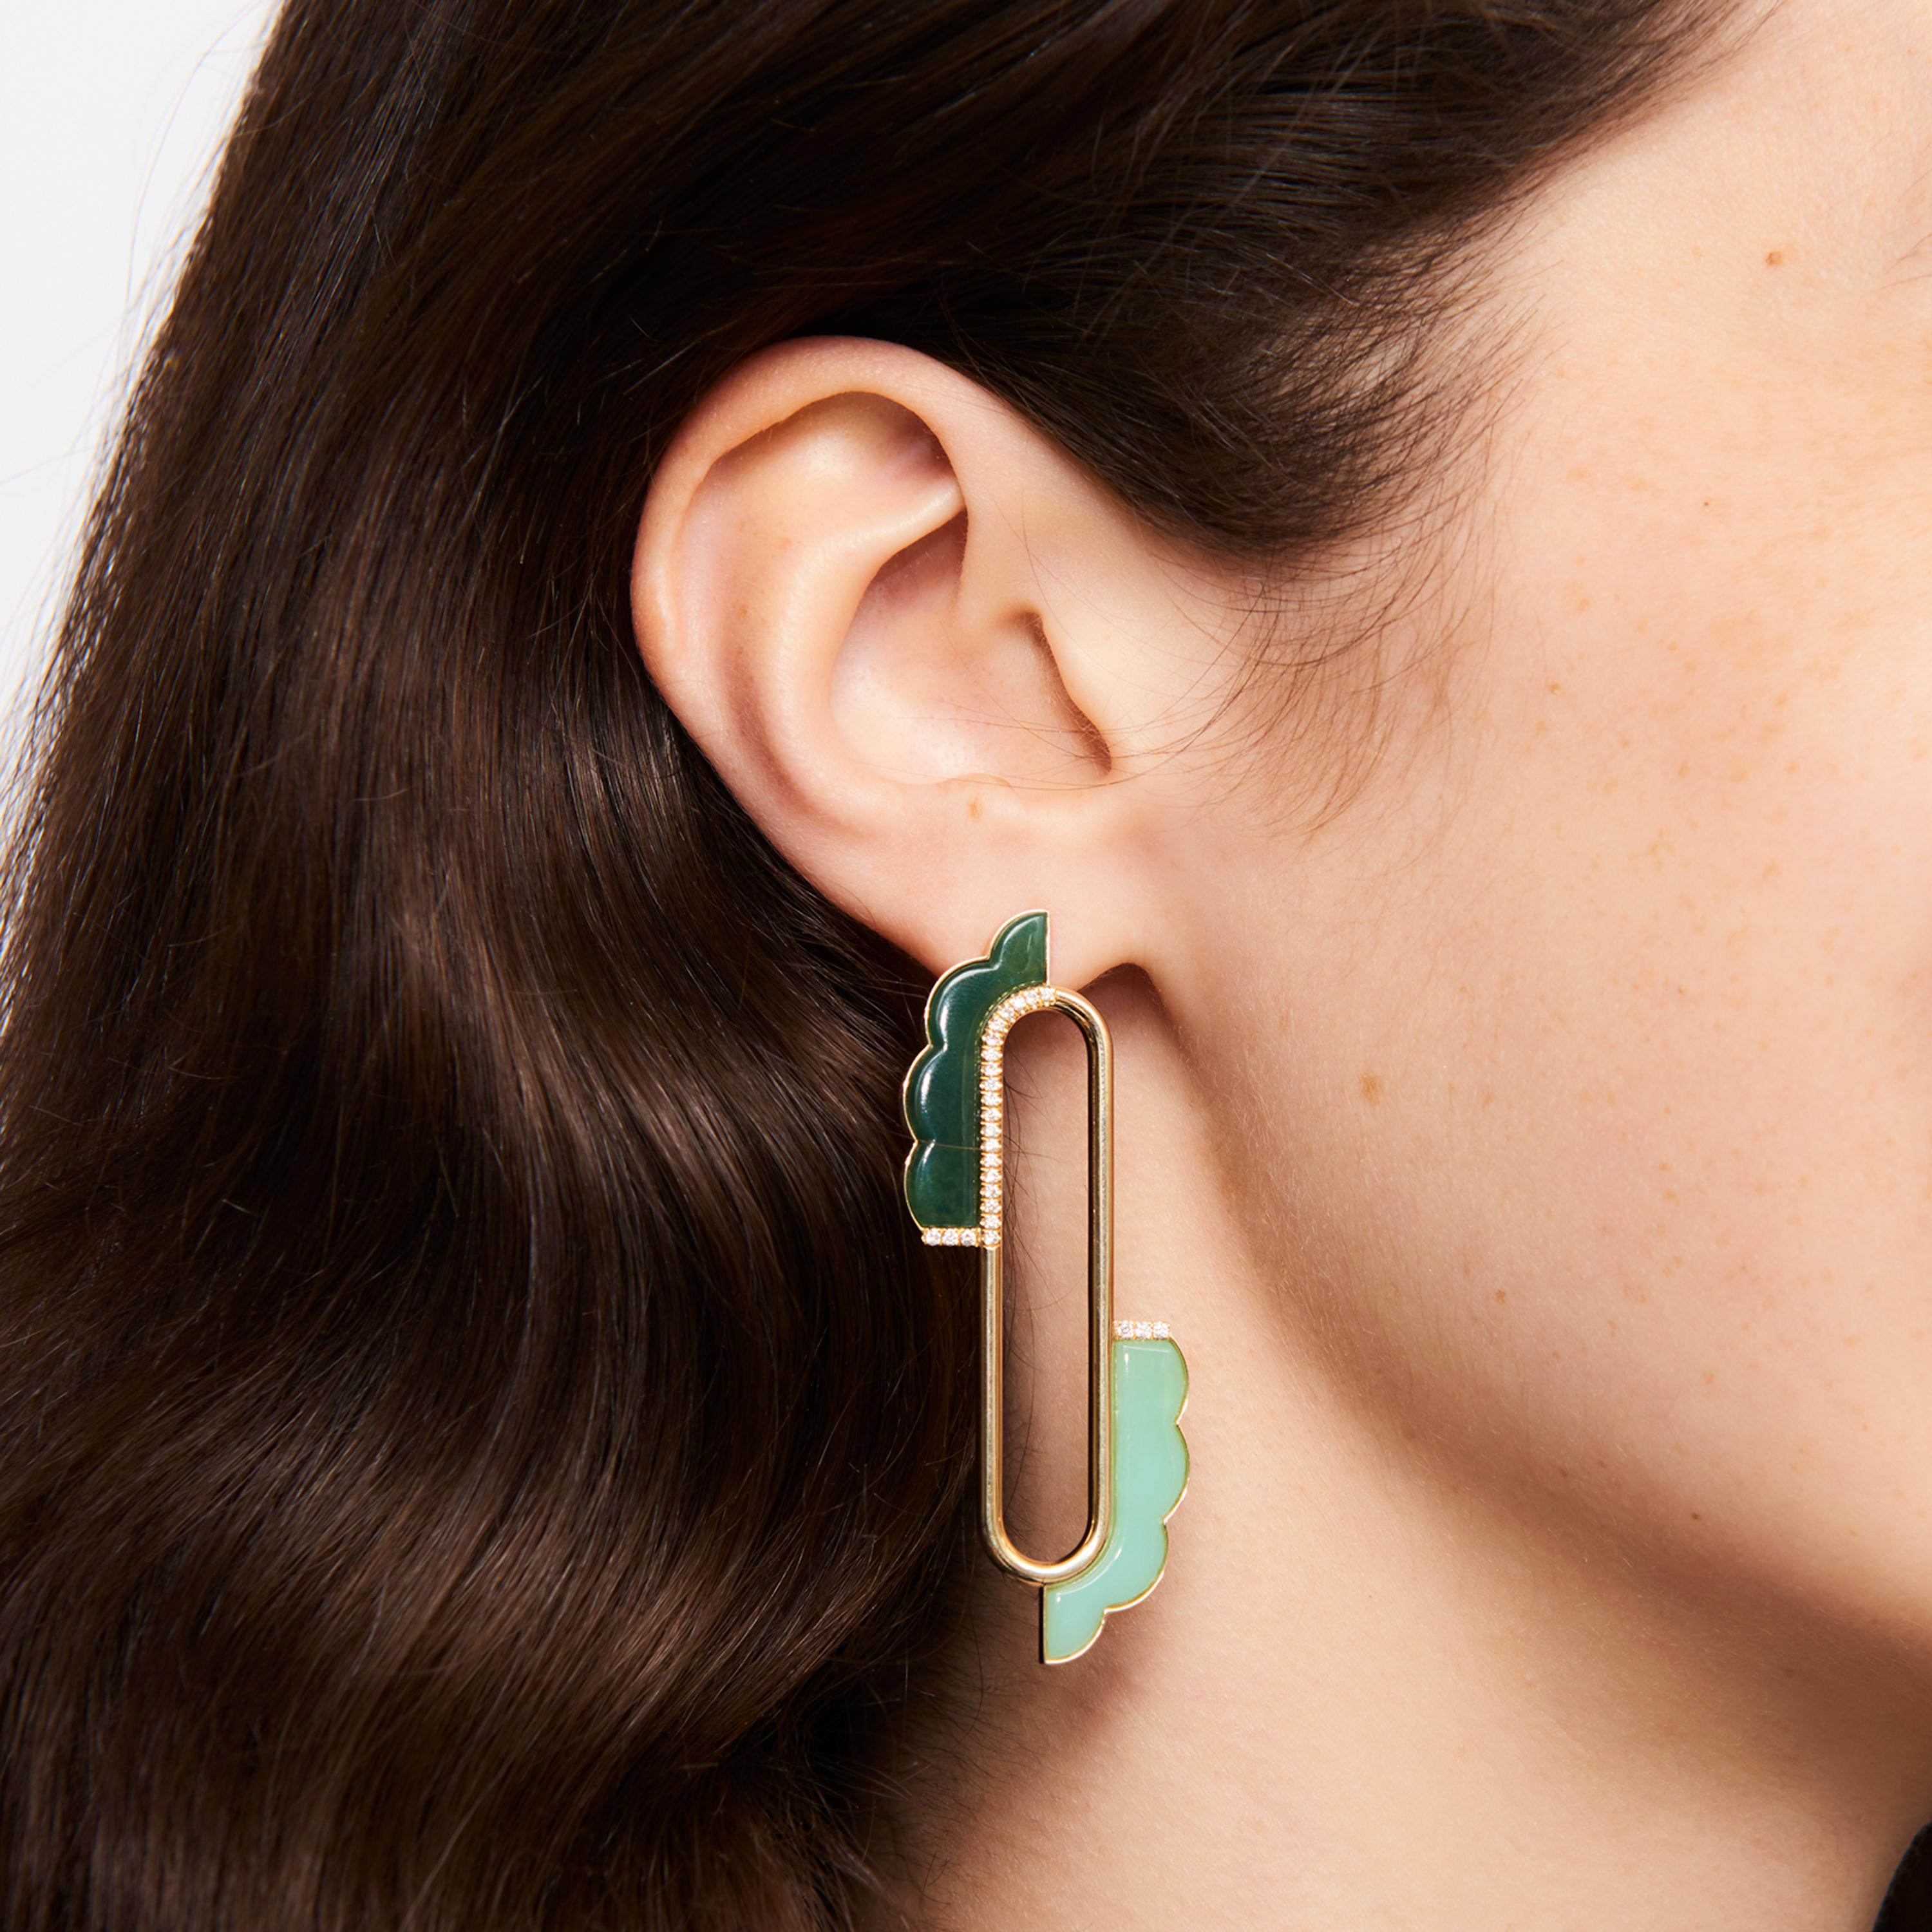 Ioanna Souflia’s Atelier Earrings are crafted from 14 karat yellow gold with sculptural custom cut chromium chalcedony and chrysoprase. She decorates this graphic and voluminous yellow gold silhouette with white brilliant cut diamonds